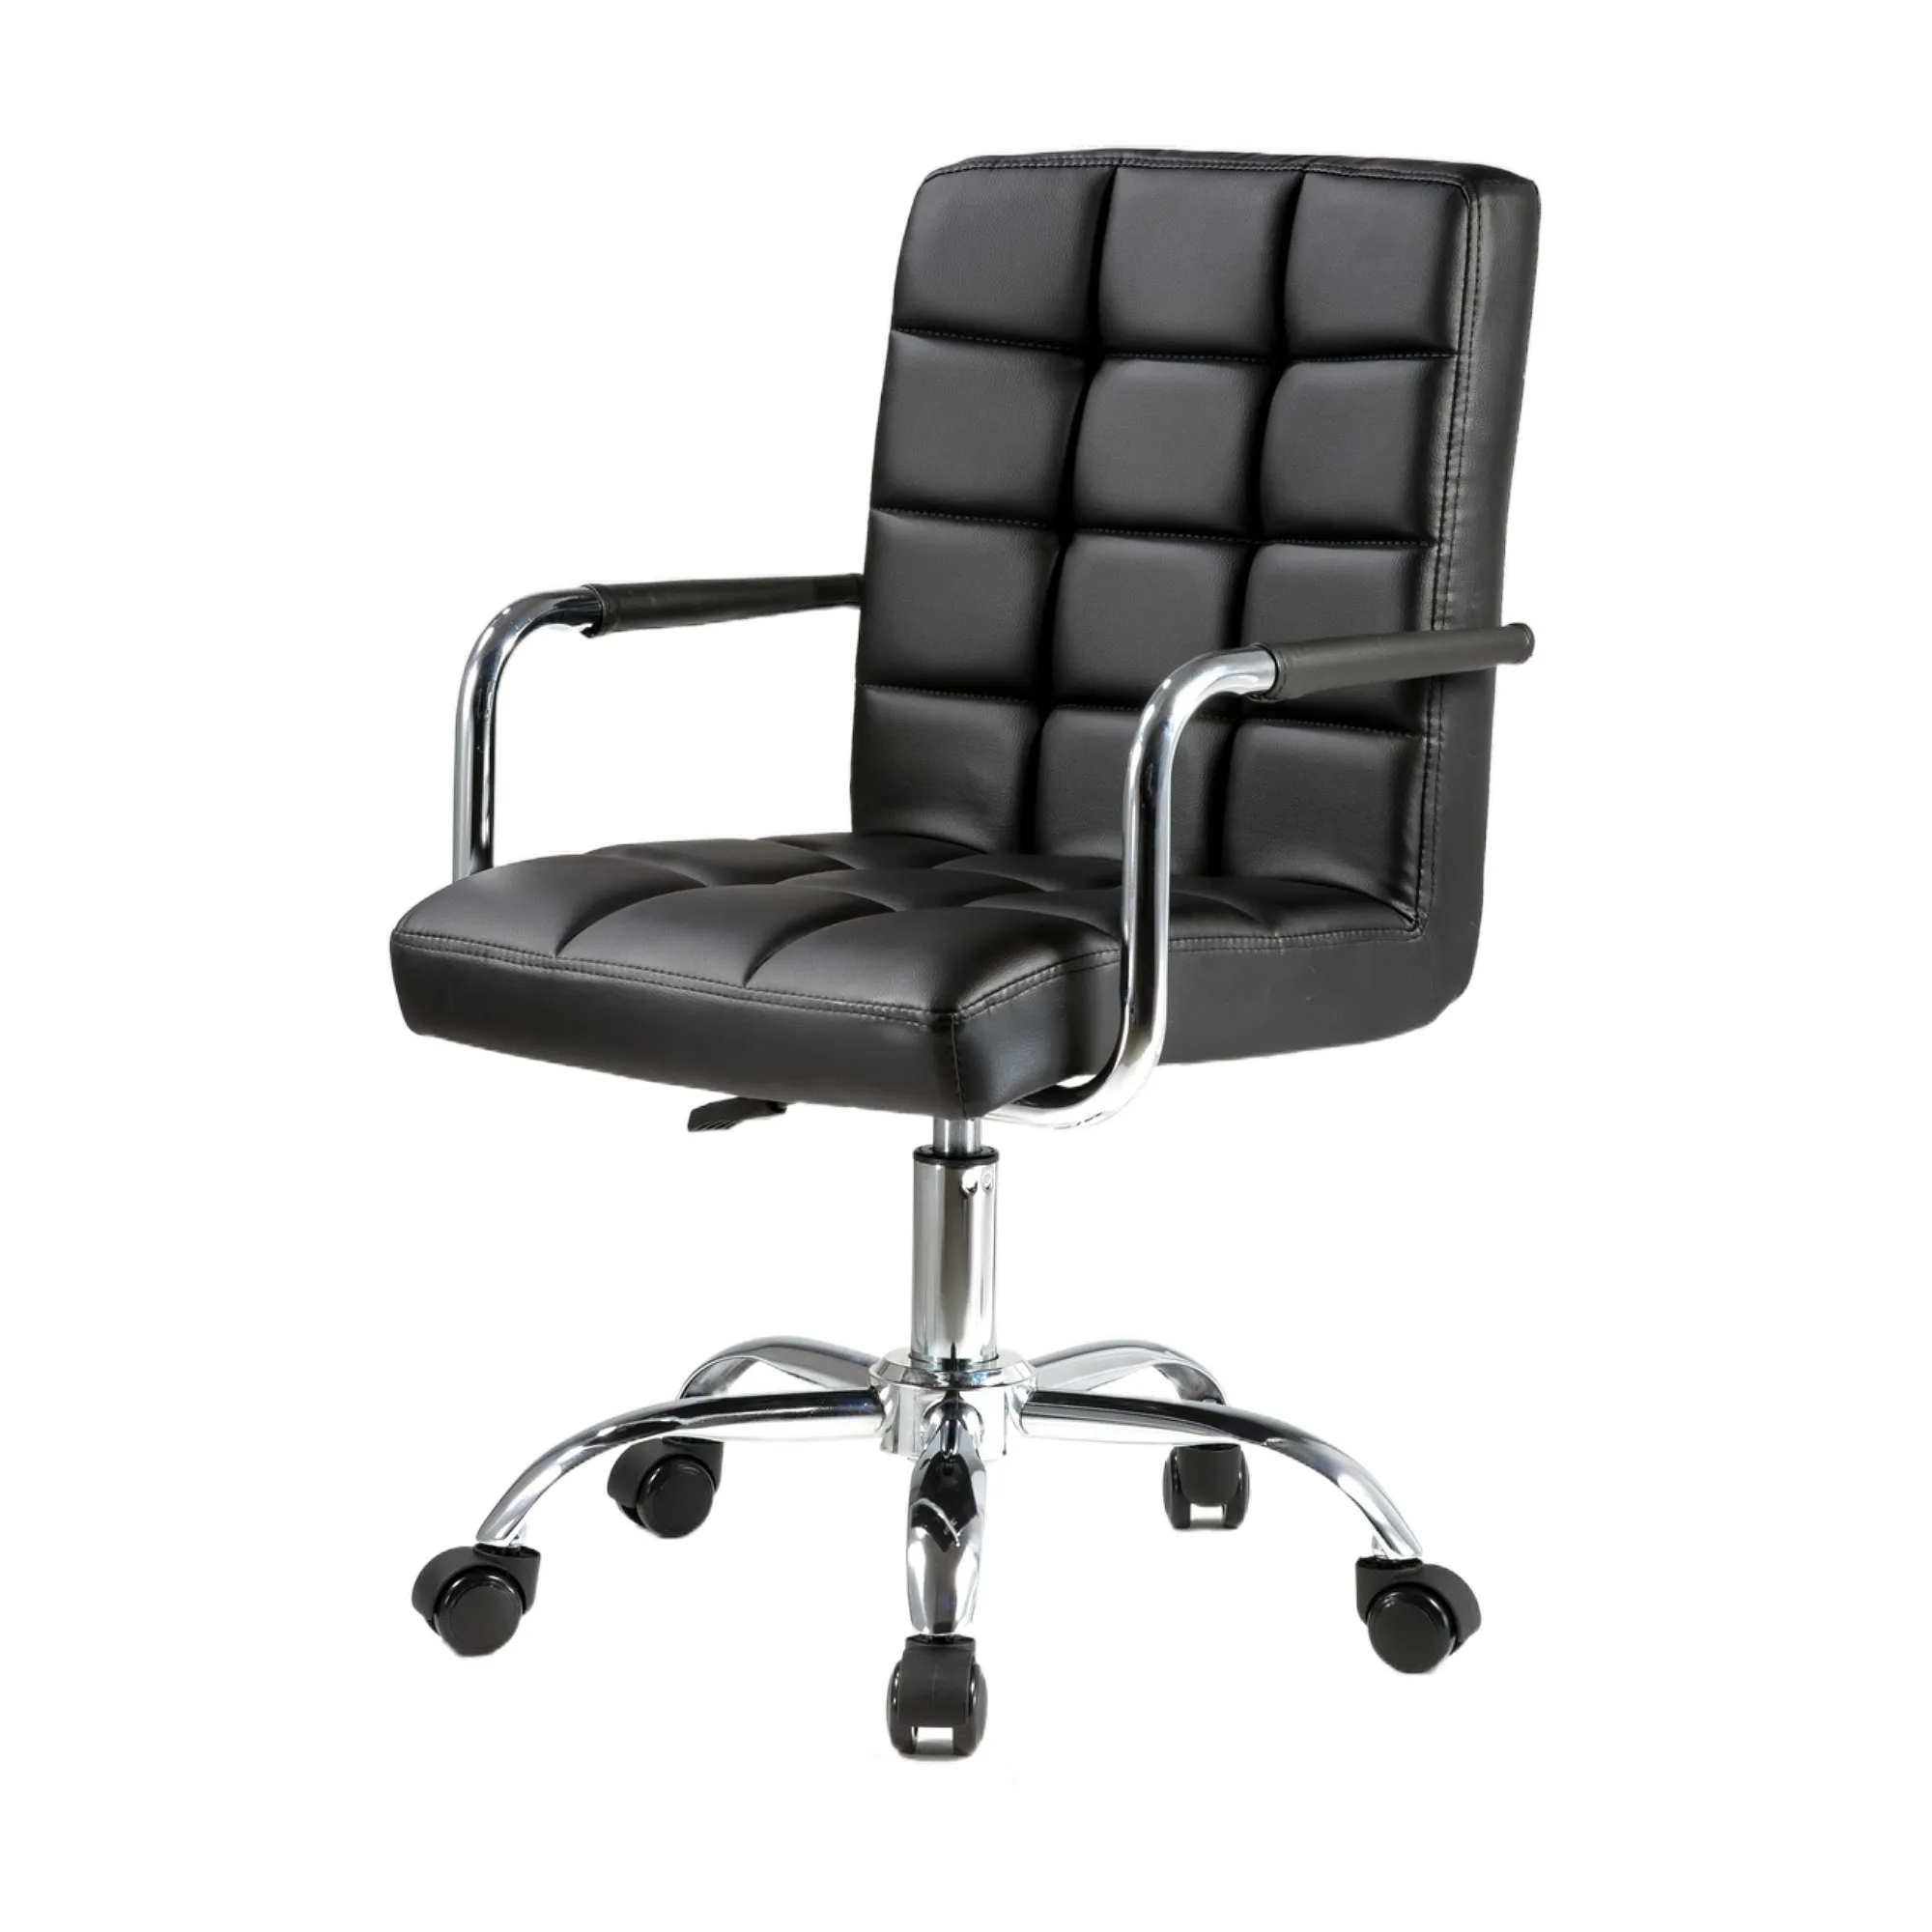 Ergonomic Leather Chair Mid Back Office Chair Living Room, Office